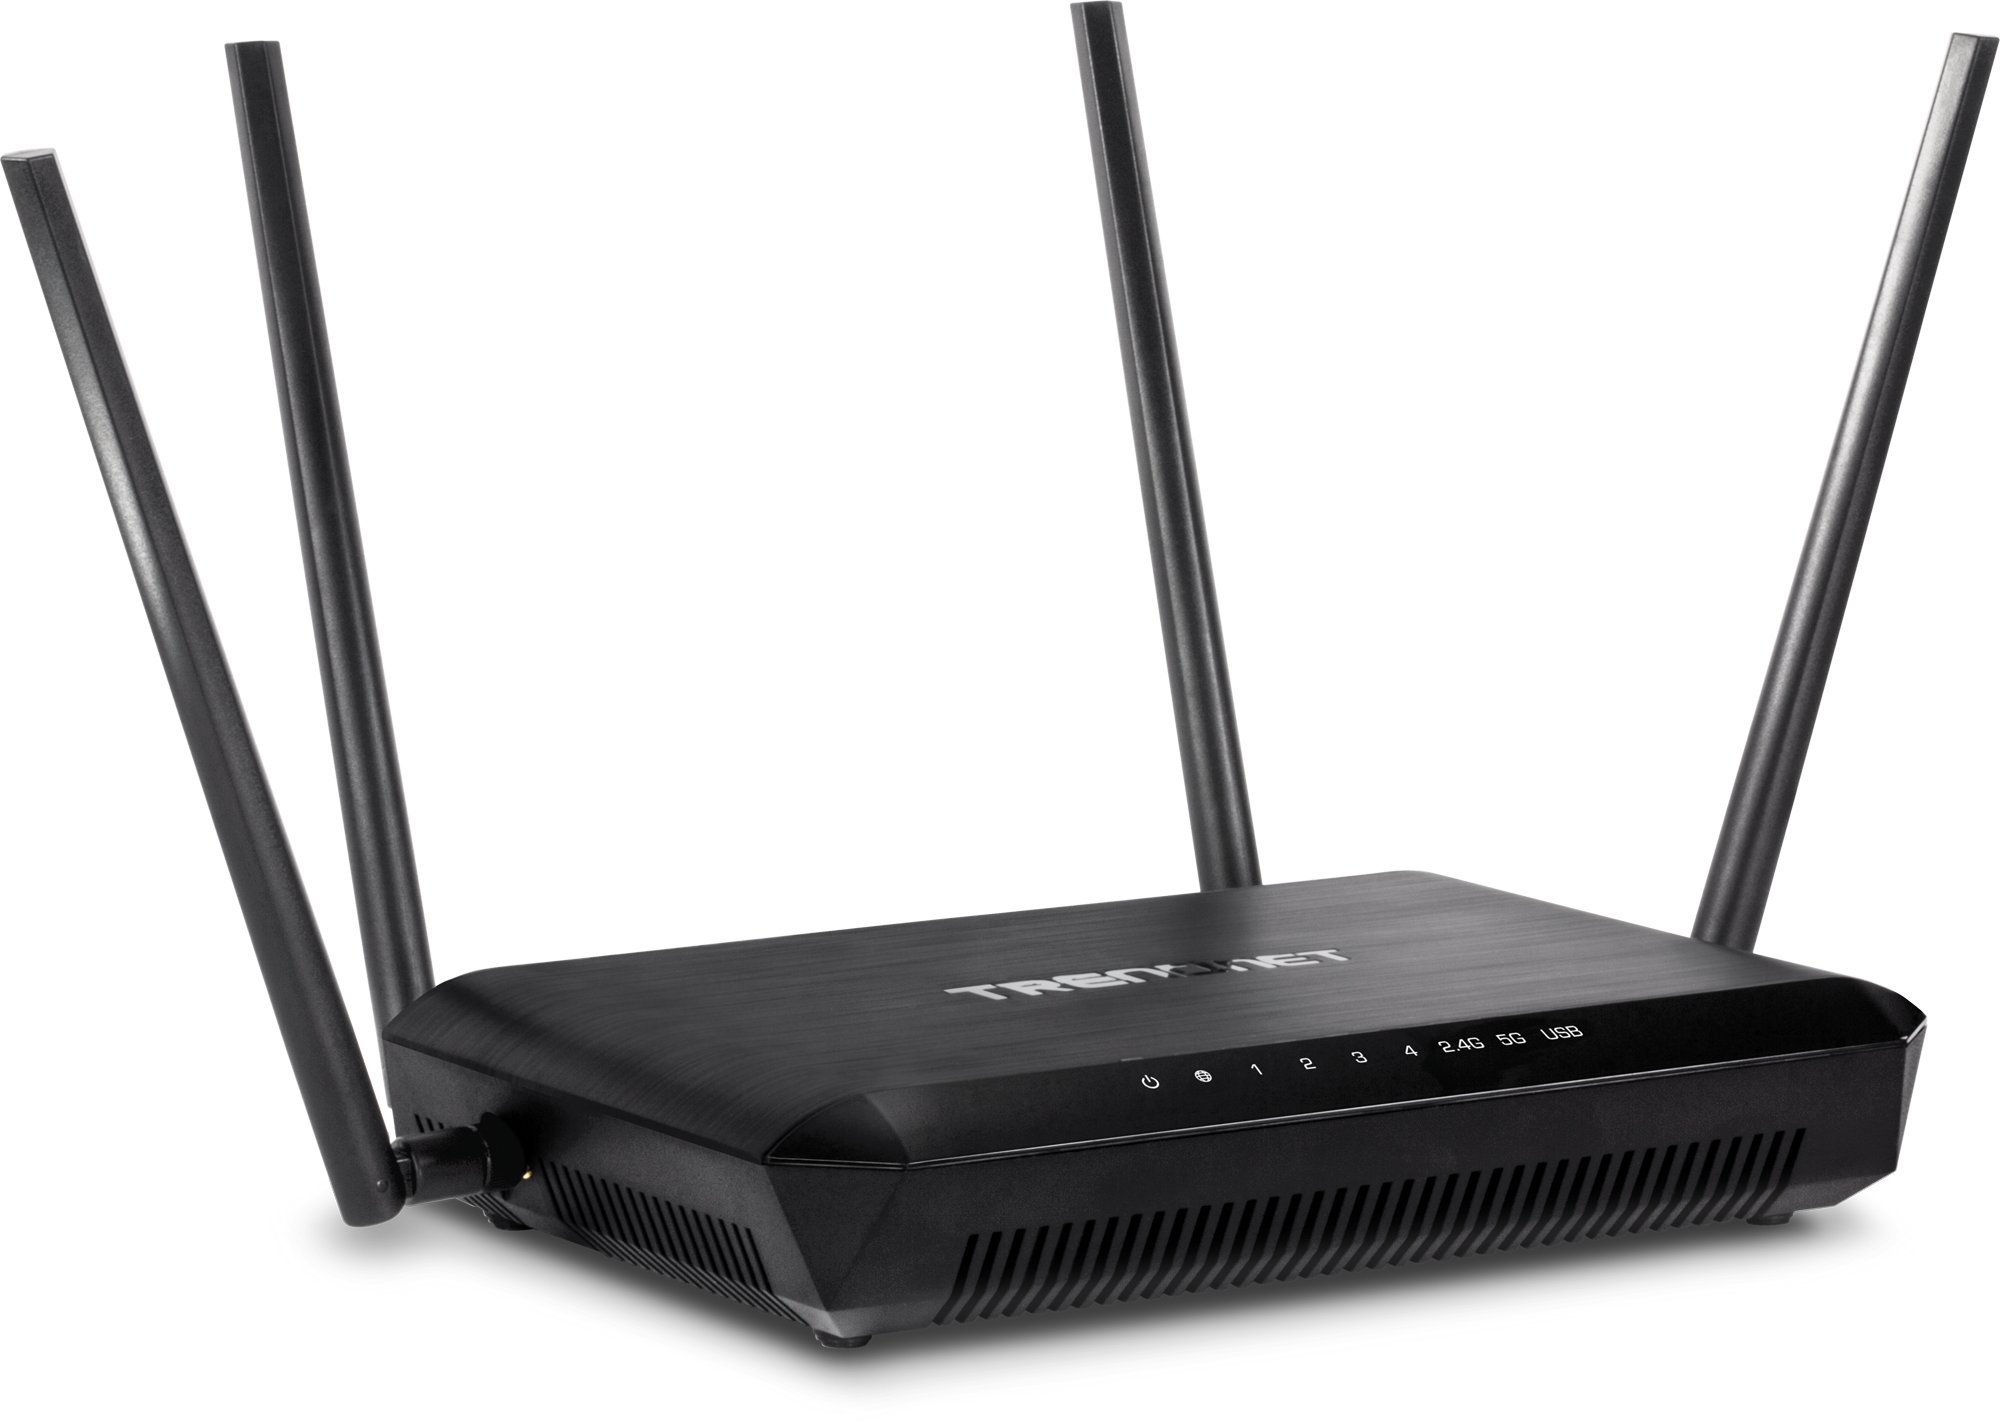 TRENDnet AC2600 MU-MIMO Wireless Gigabit Router, Increase WiFi Performance, WiFi Guest Network, Gaming-Internet-Home Router, Beamforming, 4K streaming, Quad Stream, Dual Band Router, Black, TEW-827DRU